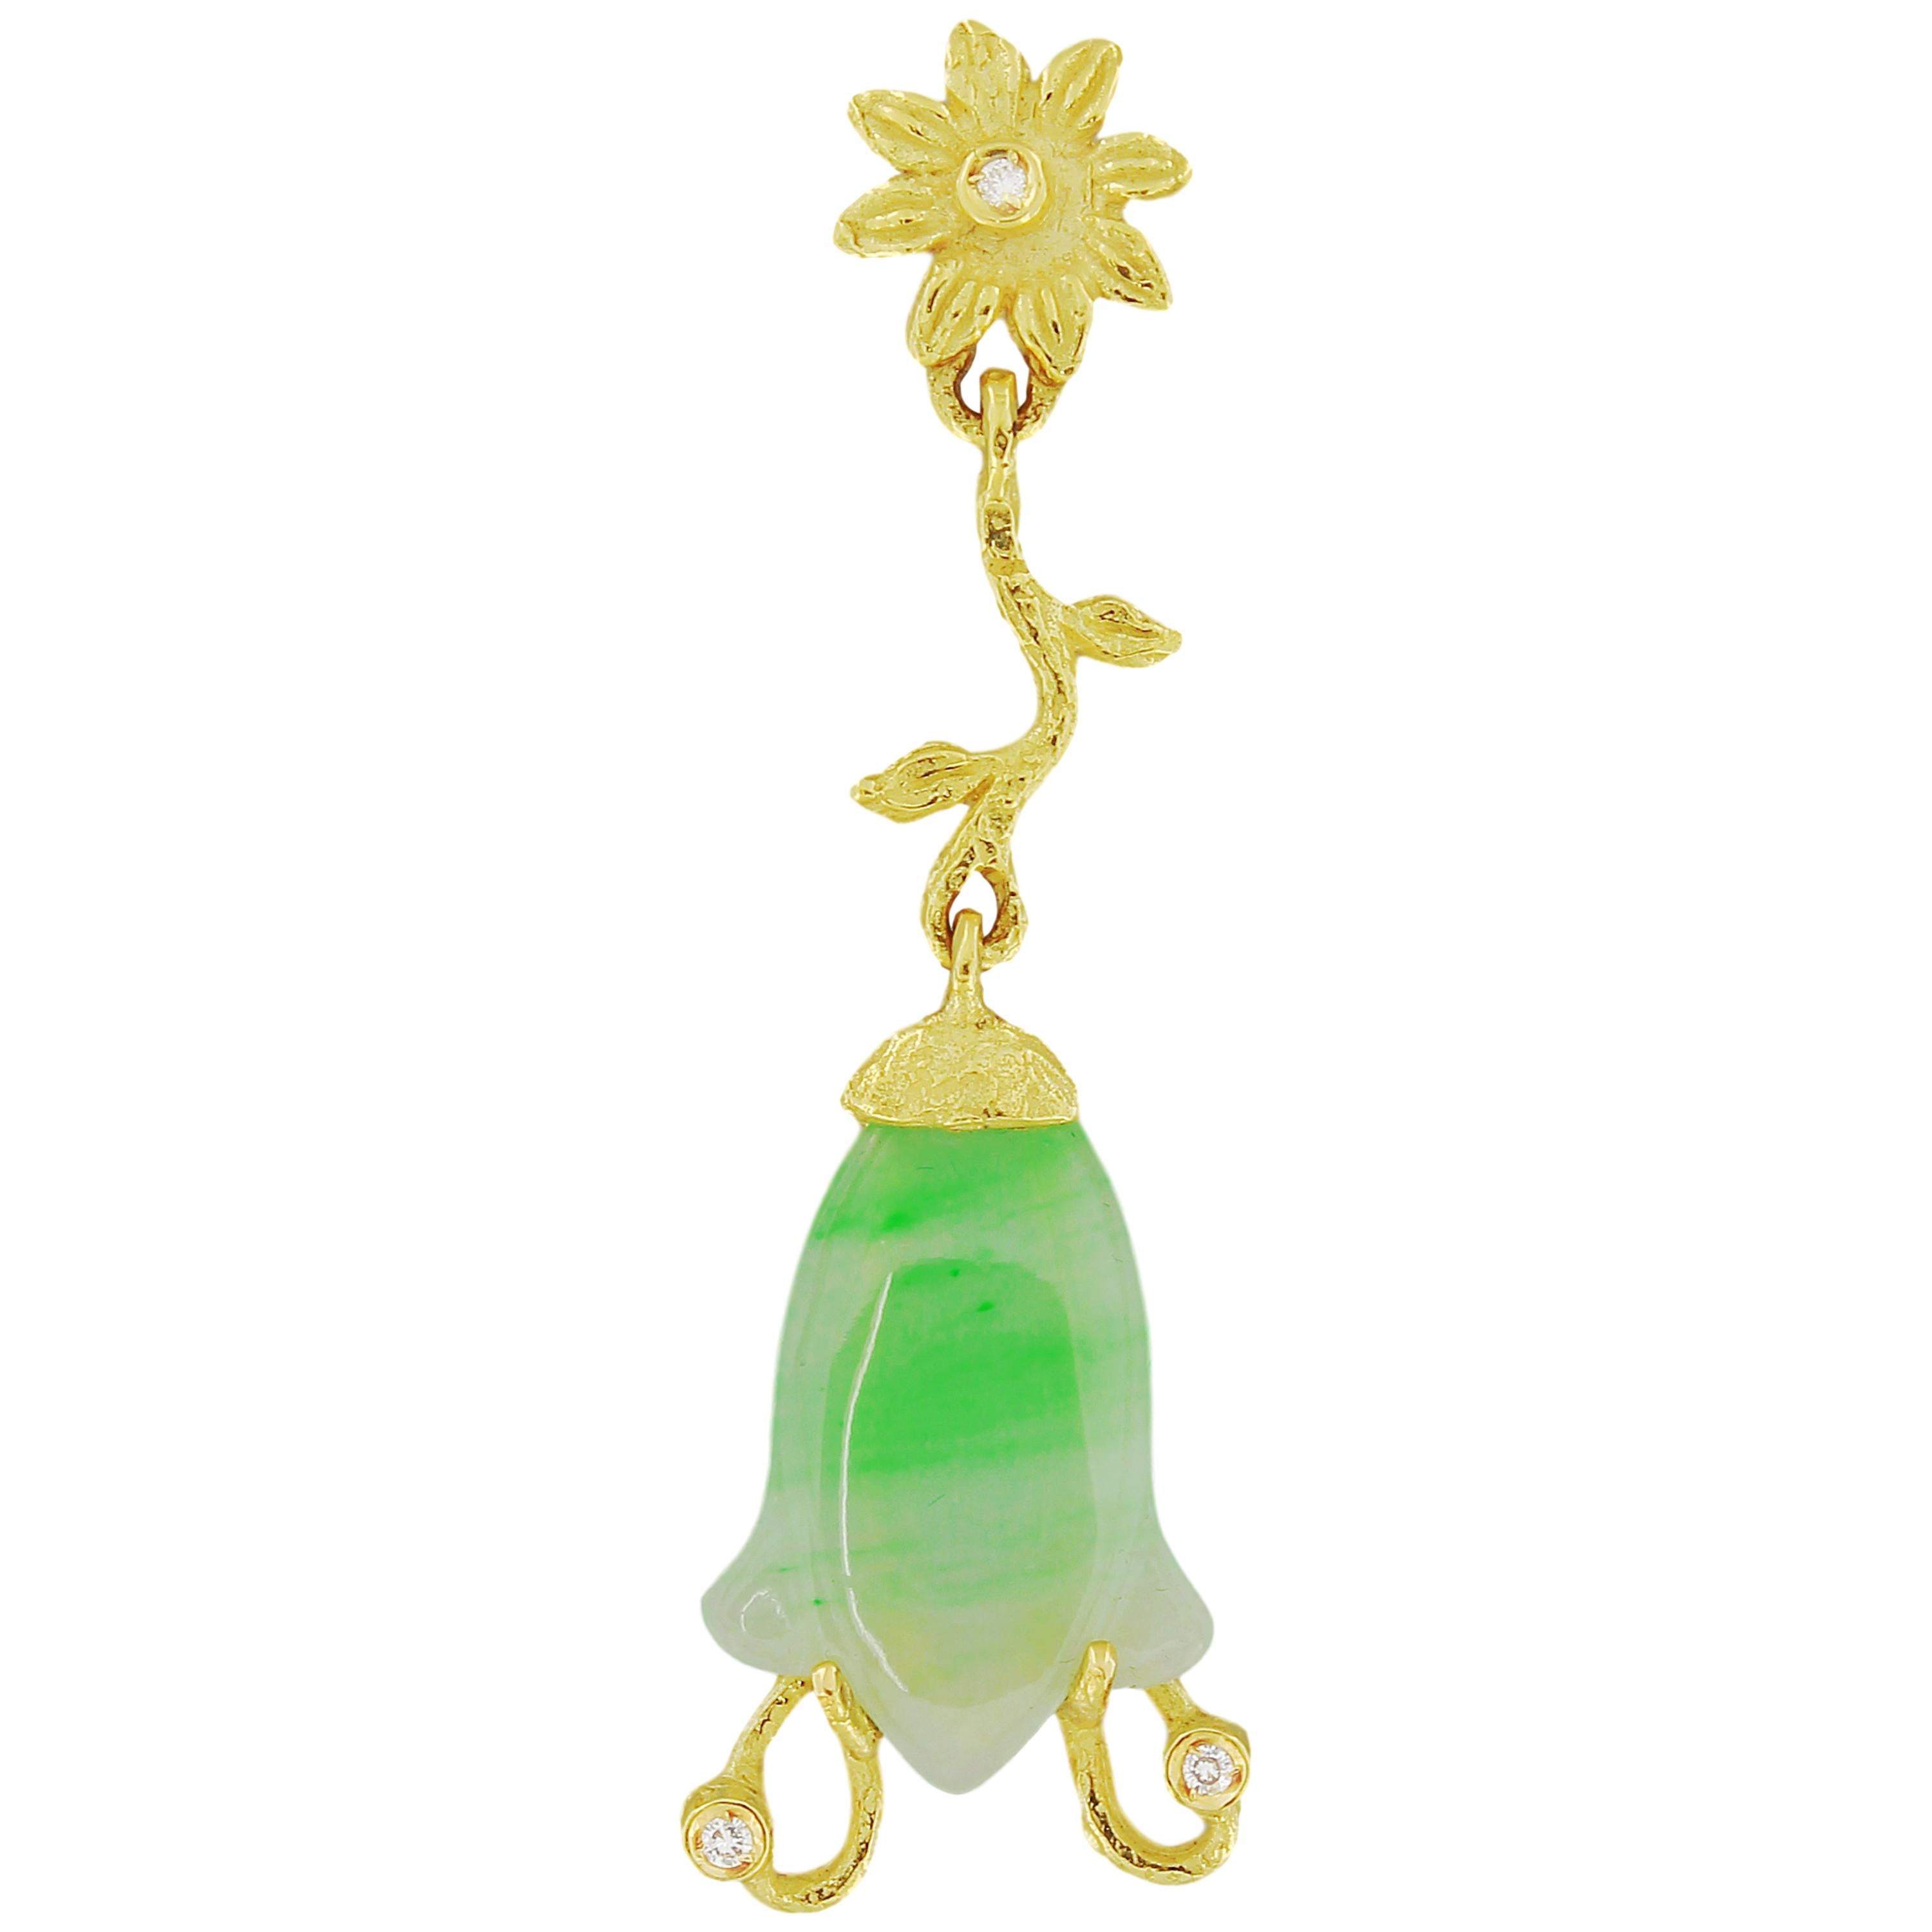 Light Green Jade and Diamonds Flower Drop Earrings 18 Karat Yellow Gold, hand-crafted with lost-wax casting technique.

Lost-wax casting, one of the oldest techniques for creating jewelry, forms the basis of Sacchi's jewelry production. Modelling